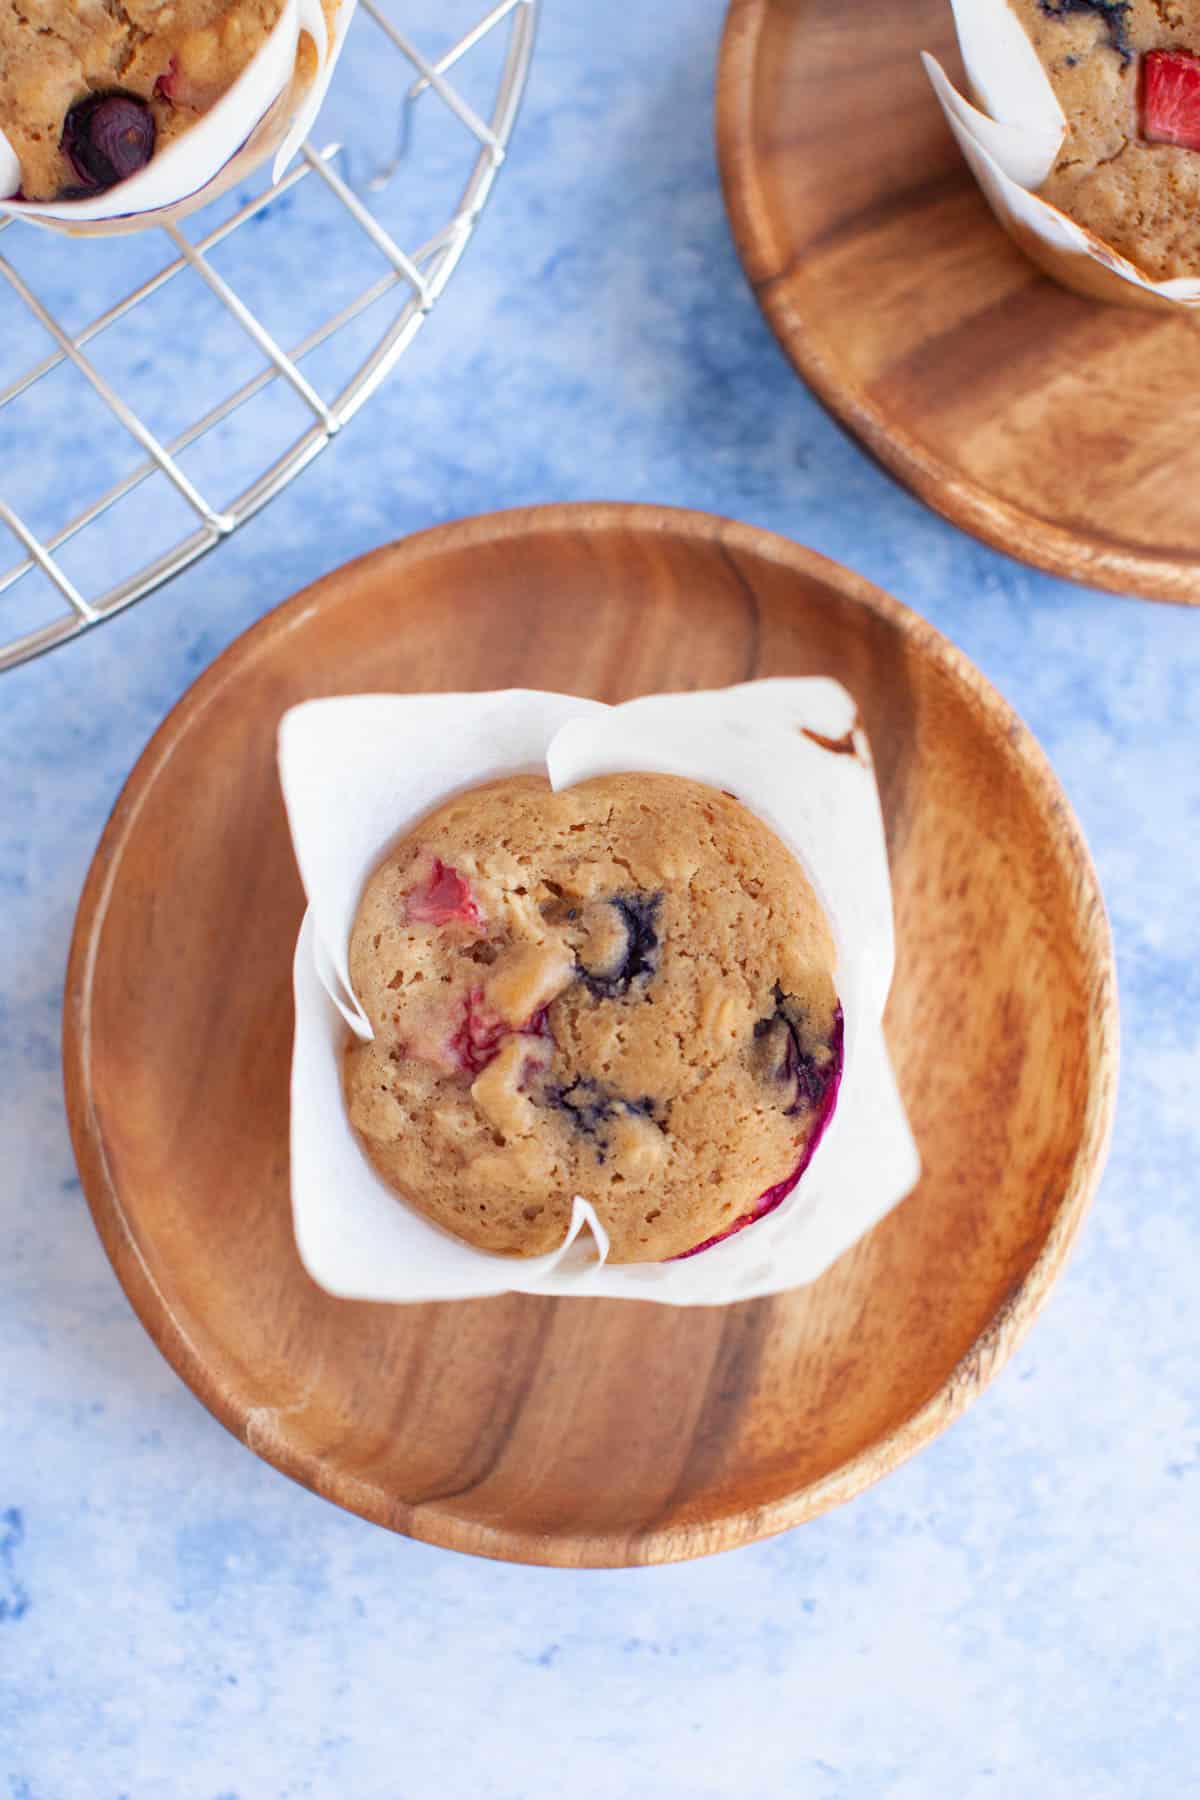 muffins on wooden plates on a blue counter.